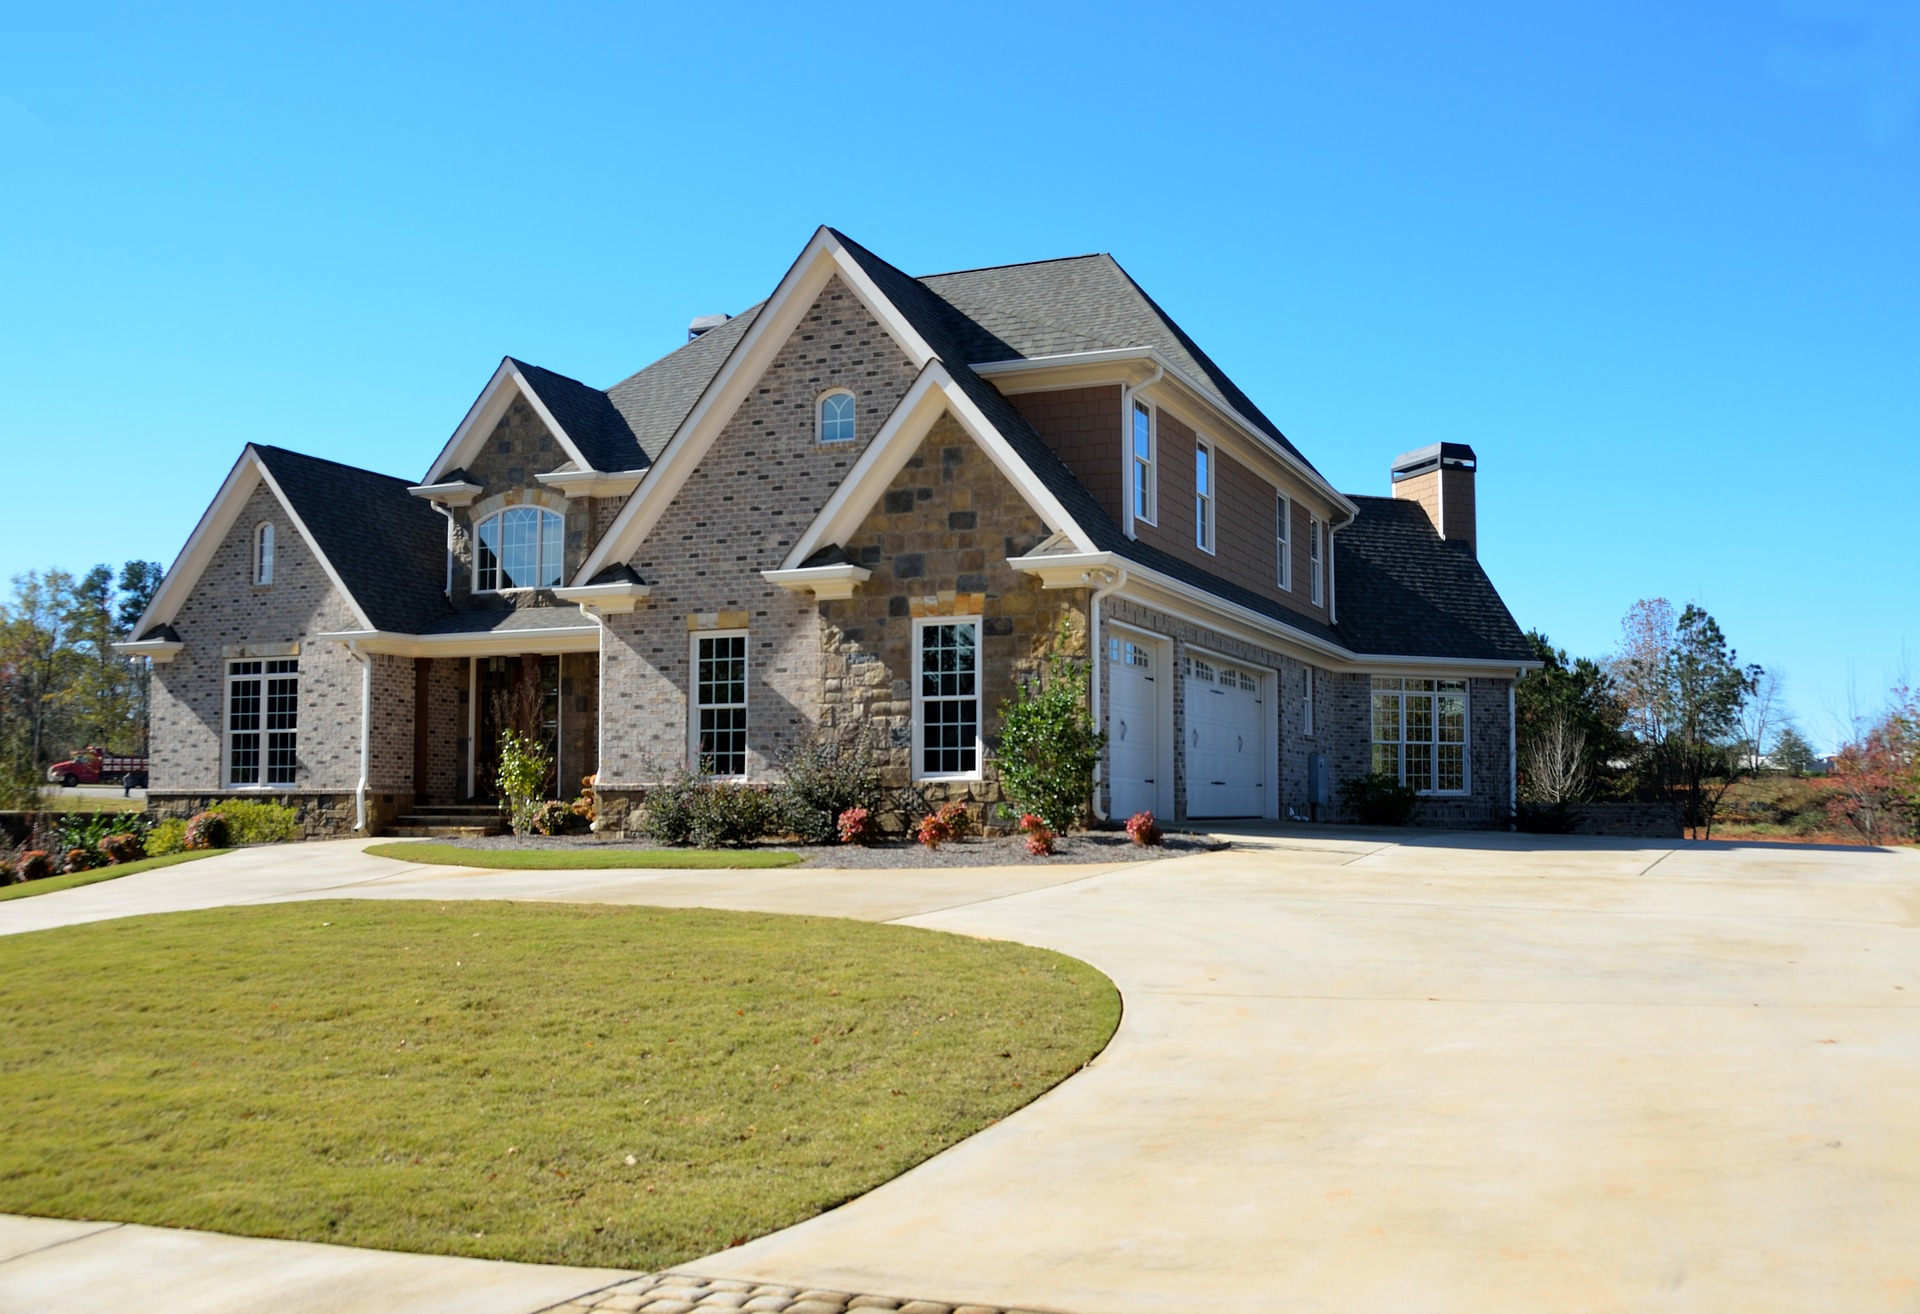 Concrete Driveways and Circle Driveway - Pearland